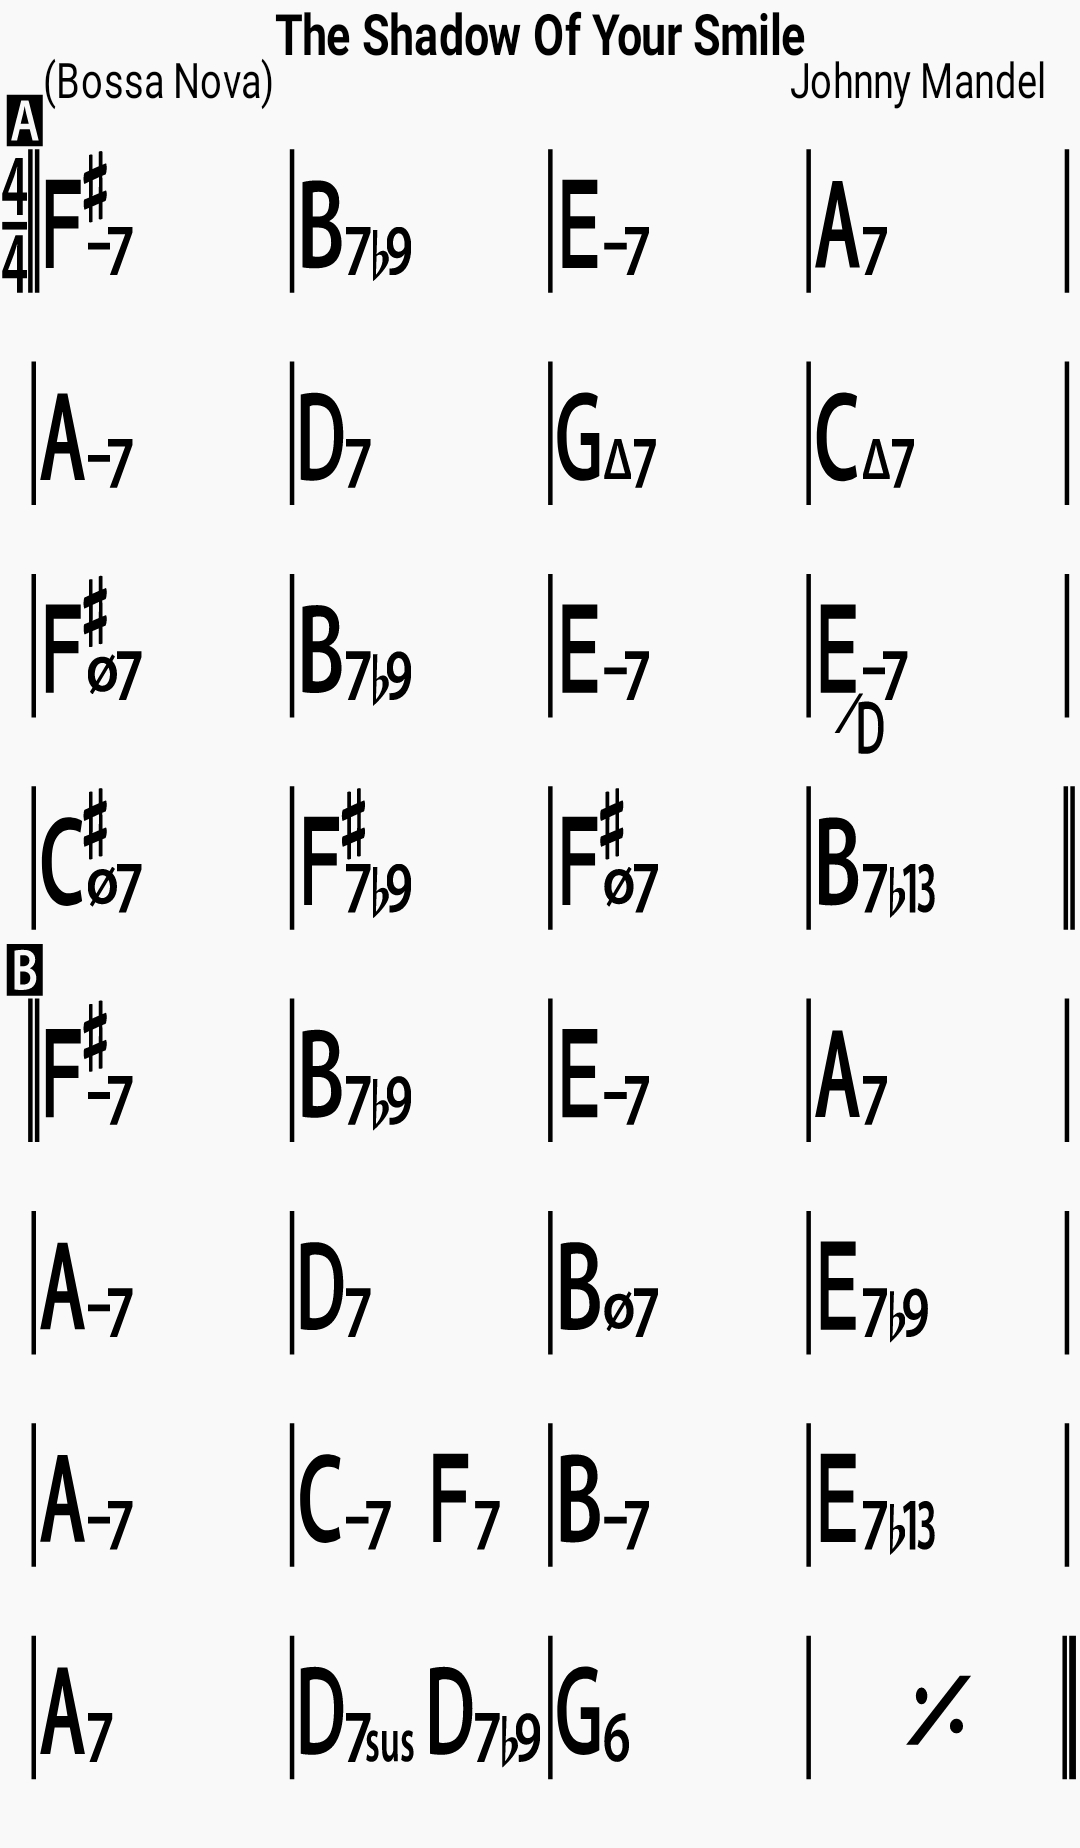 Chord chart for the jazz standard Shadow Of Your Smile